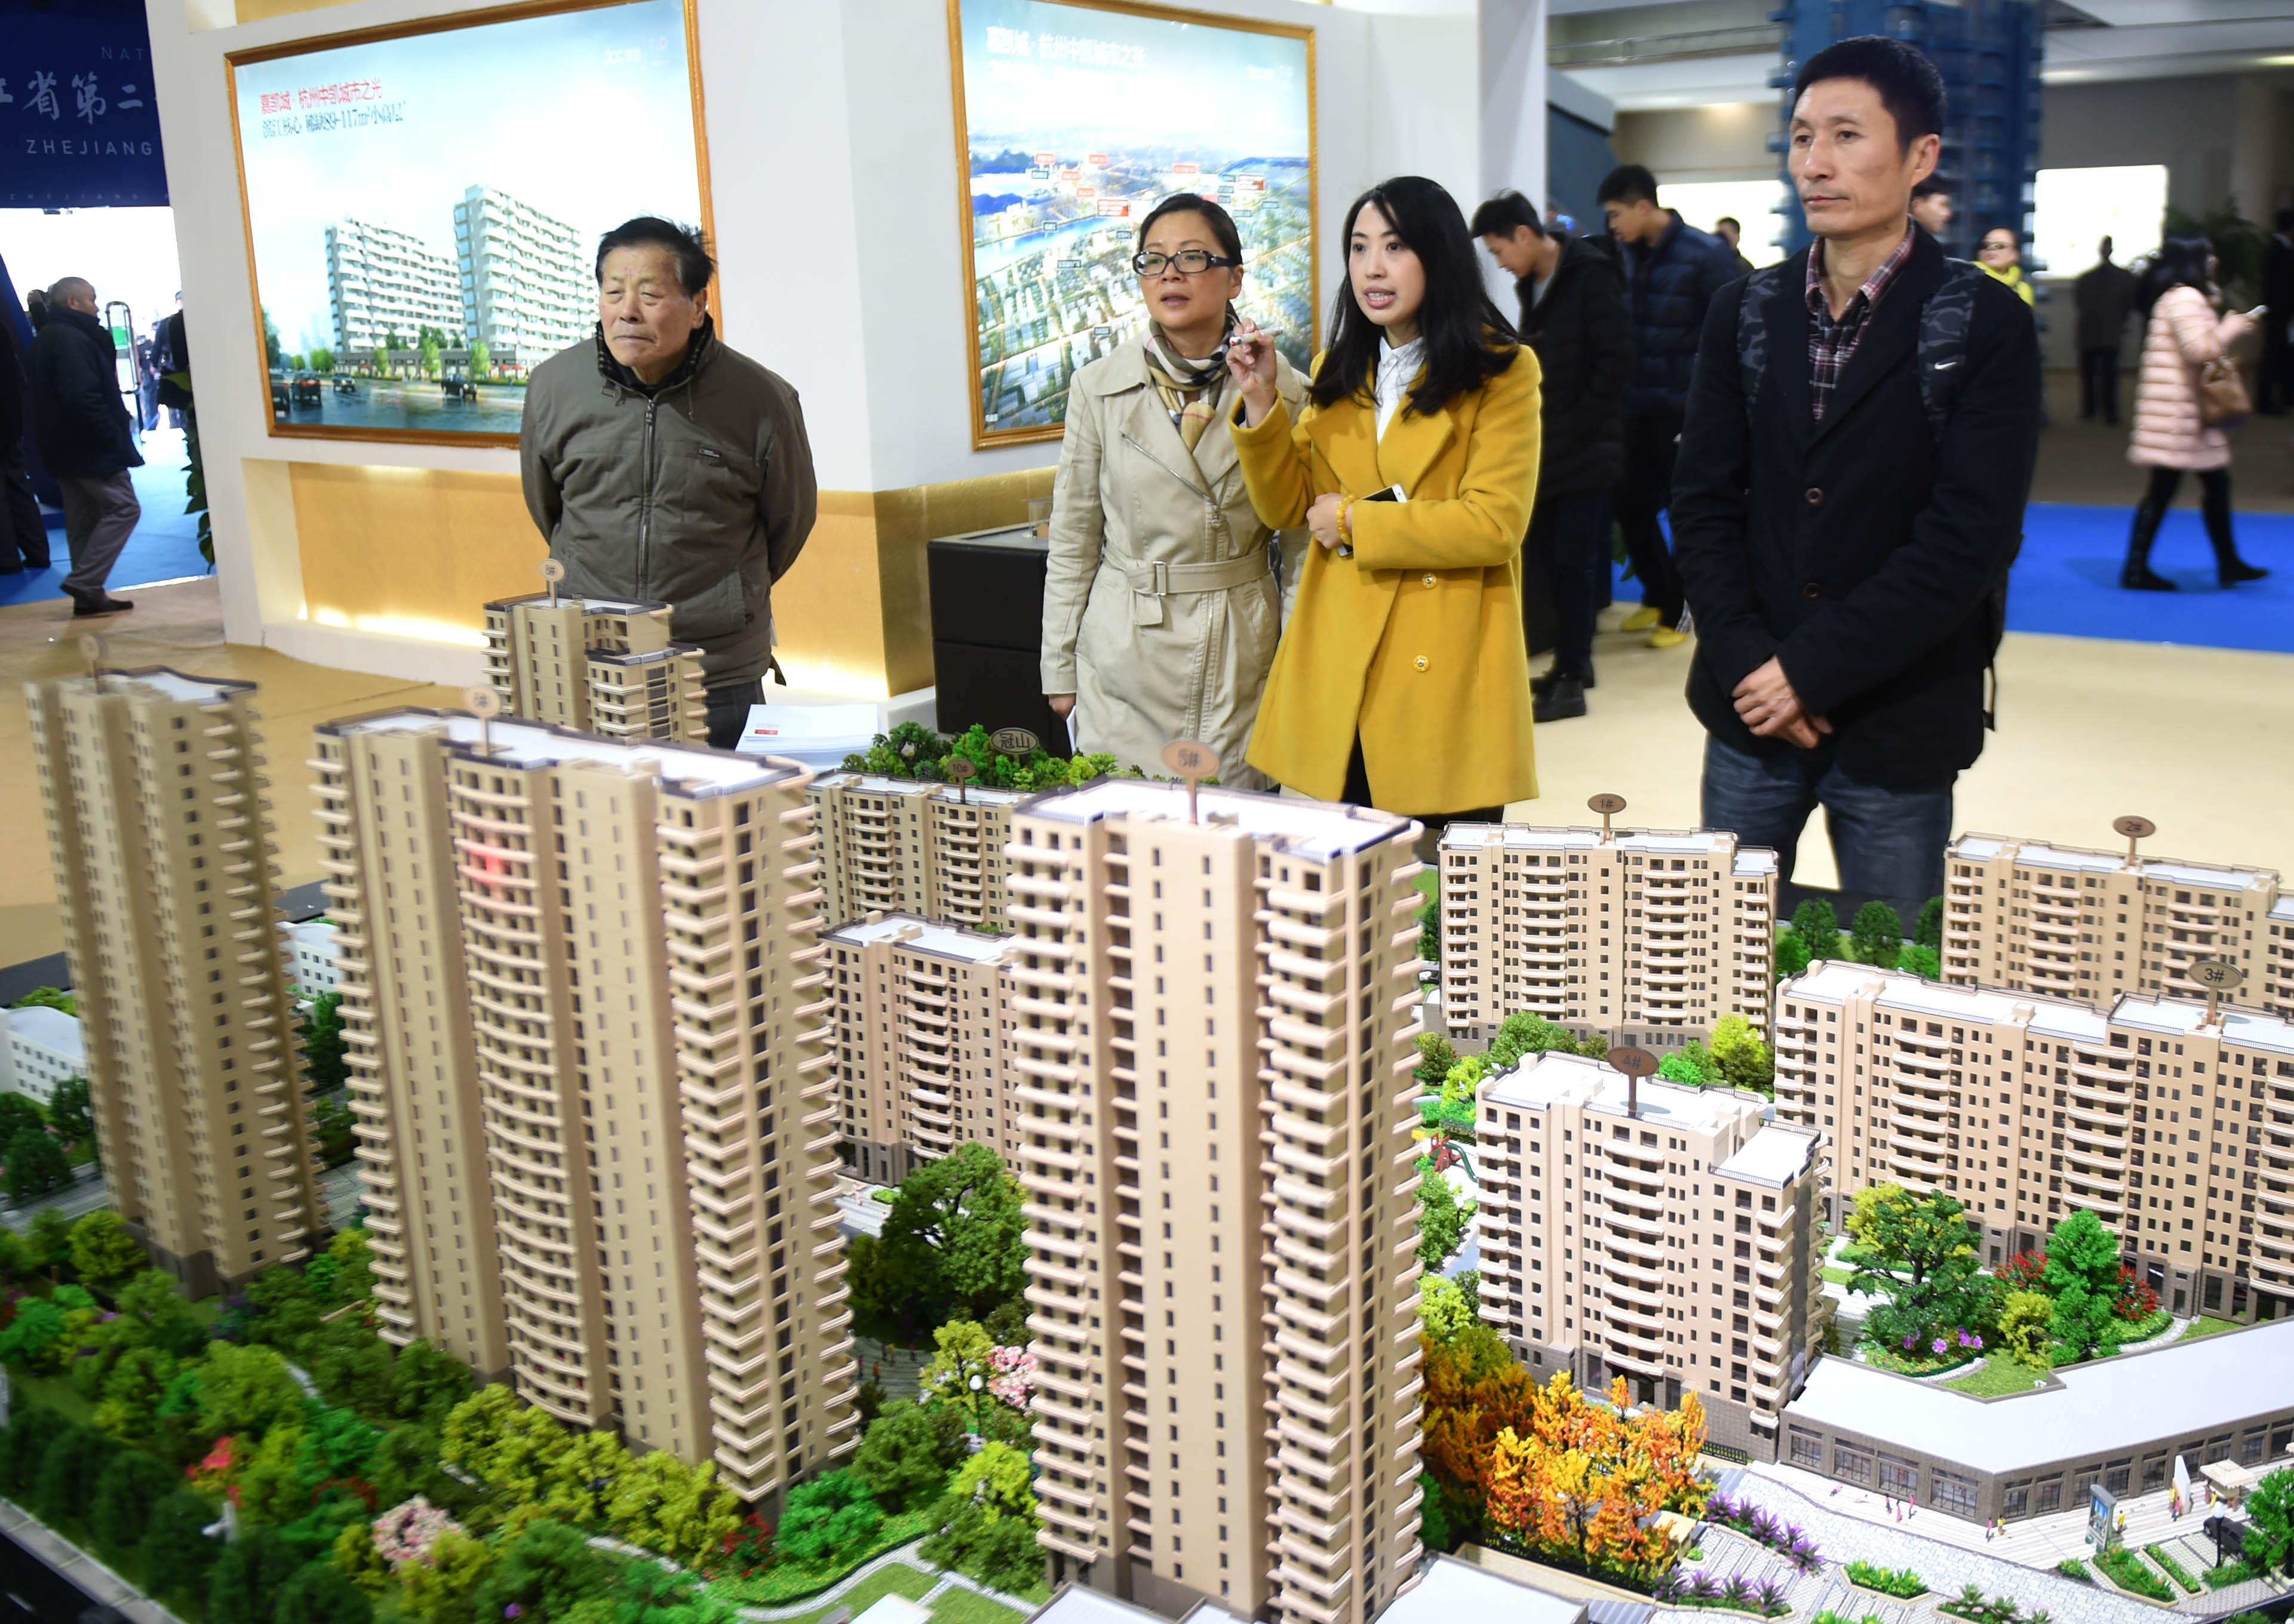 (151127) -- HANGZHOU, Nov. 27, 2015 (Xinhua) -- People visit a house and auto expo in Hangzhou, capital of east China's Zhejiang Province, Nov. 27, 2015. A total of 47 housing developers took part in the 4-day expo which kicked here on Friday. (Xinhua/Han Chuanhao) (wf)